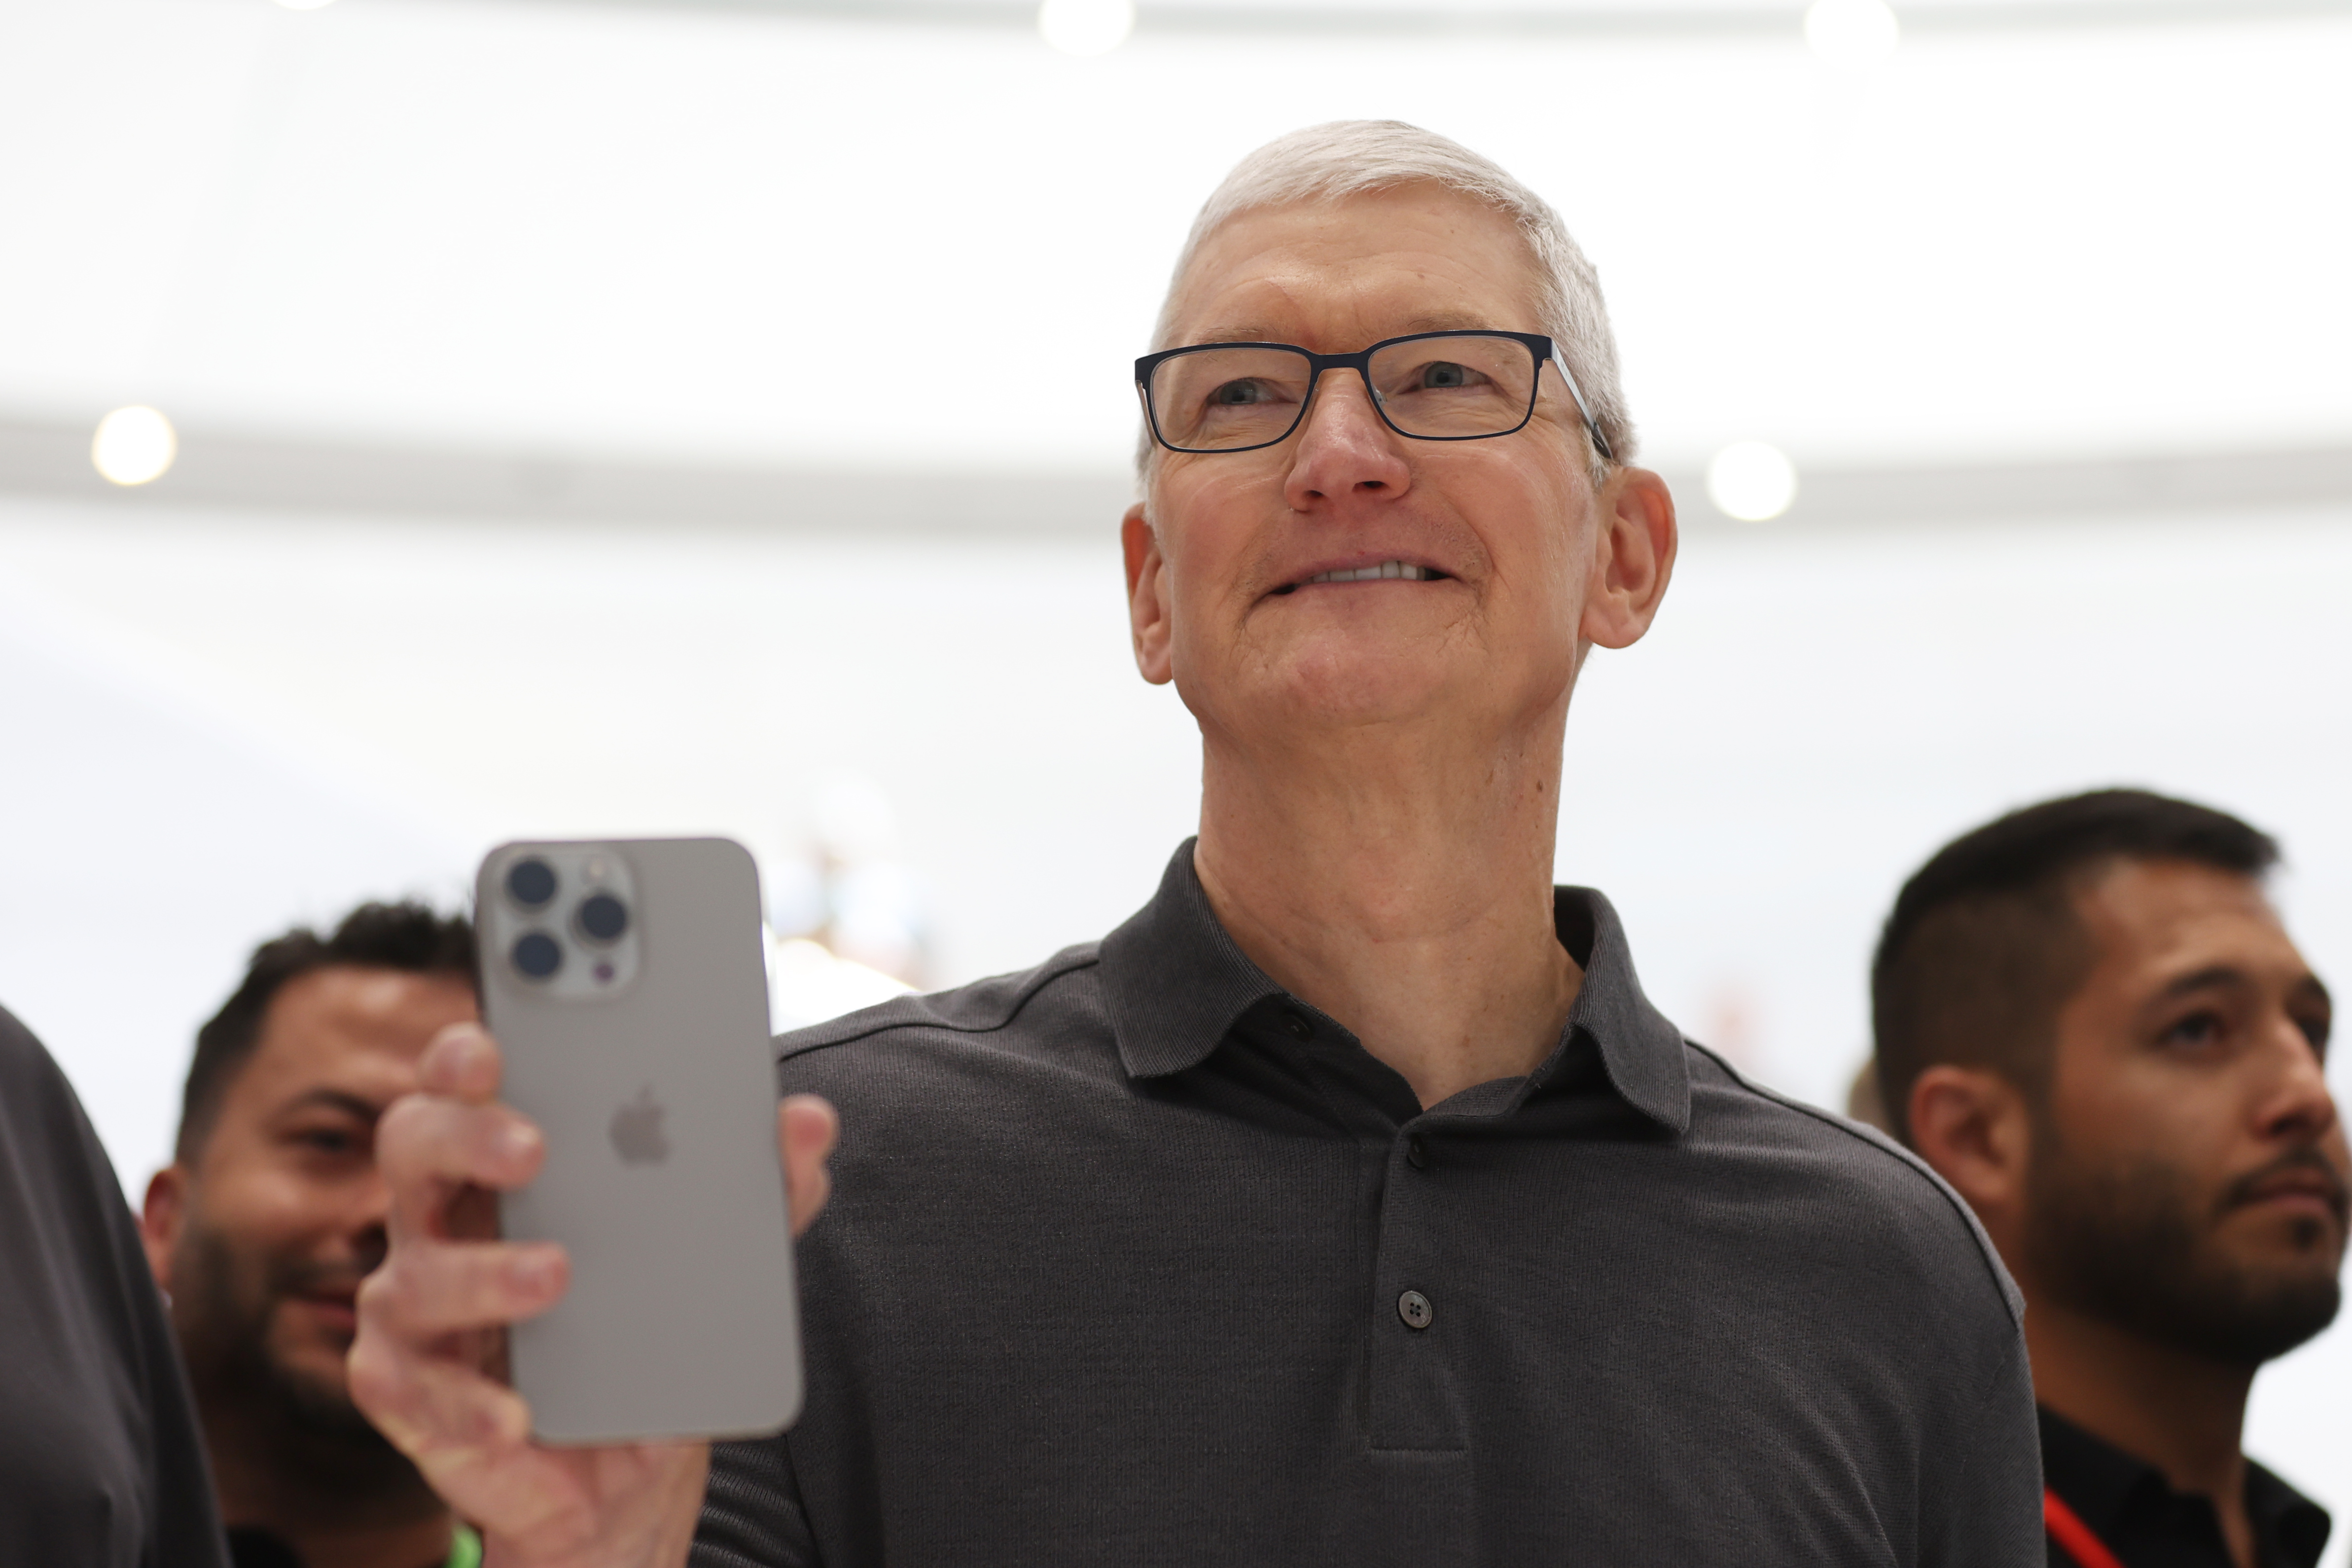 Apple CEO Tim Cook boasts of future AI plans after earnings beat